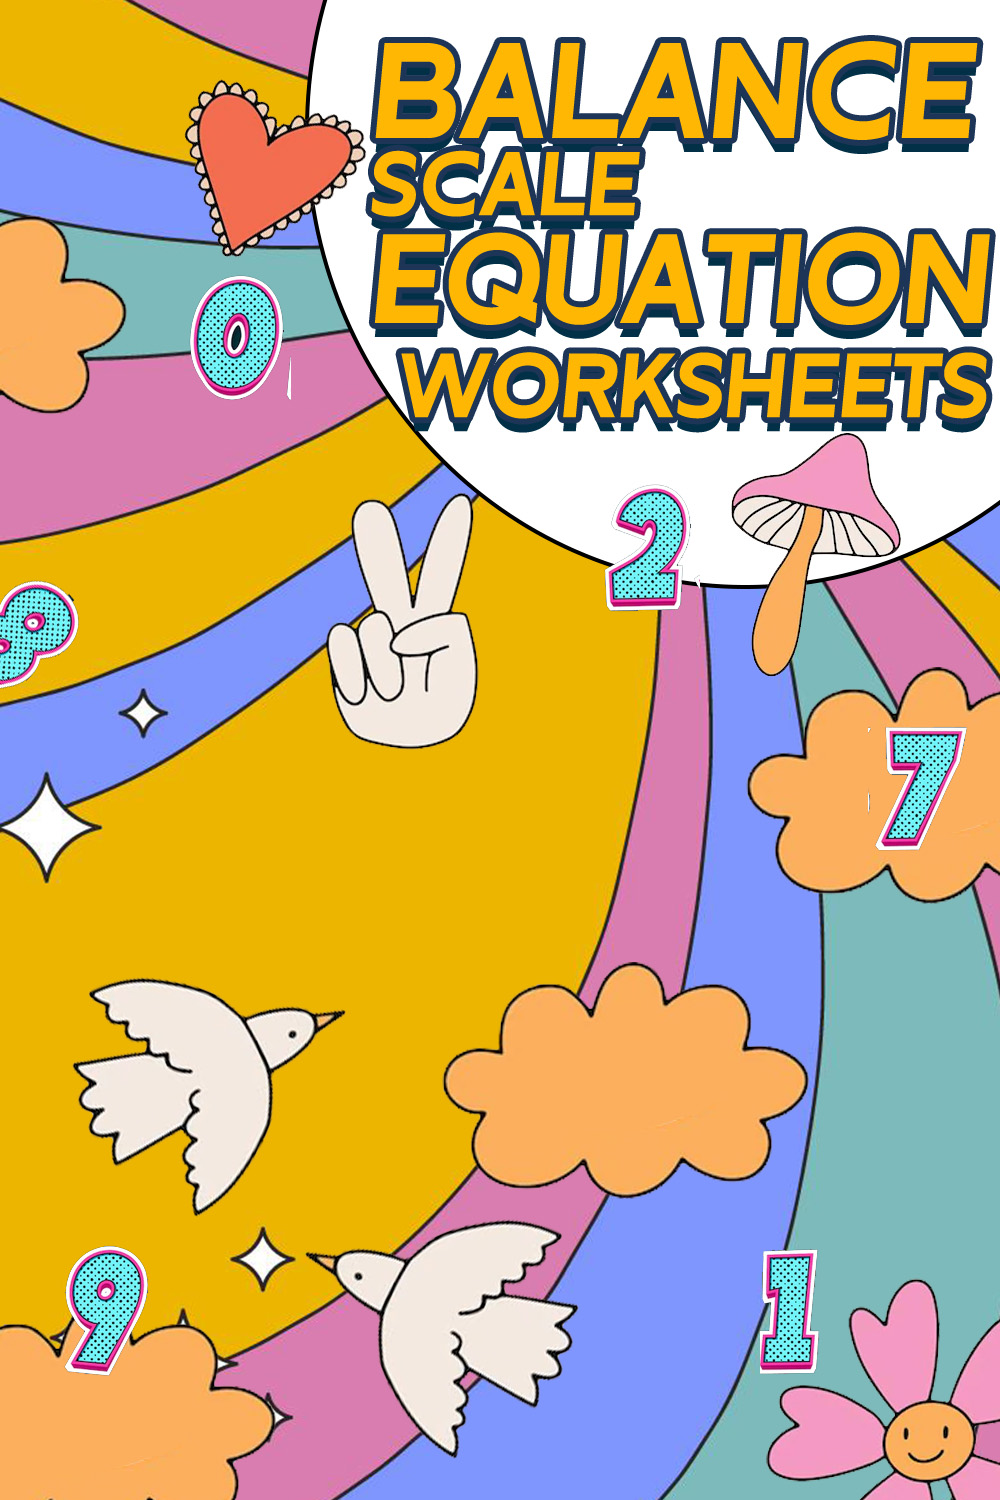 13 Images of Balance Scale Equations Worksheets